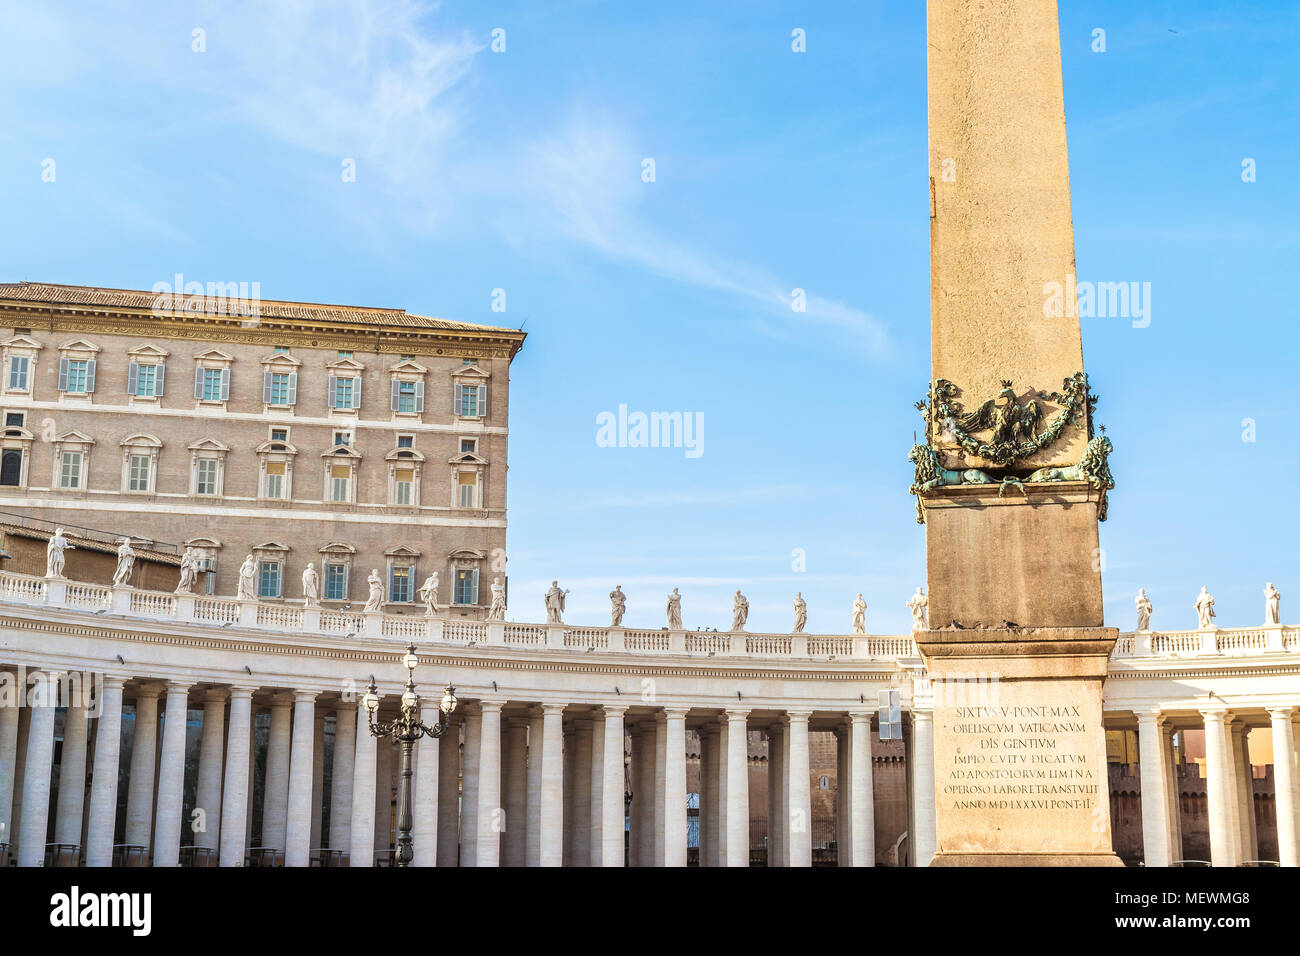 The apostolic palace and the window for the Pope's angelus above the colonnade of the Saint Peter's in the Vatican and the obelisk Stock Photo